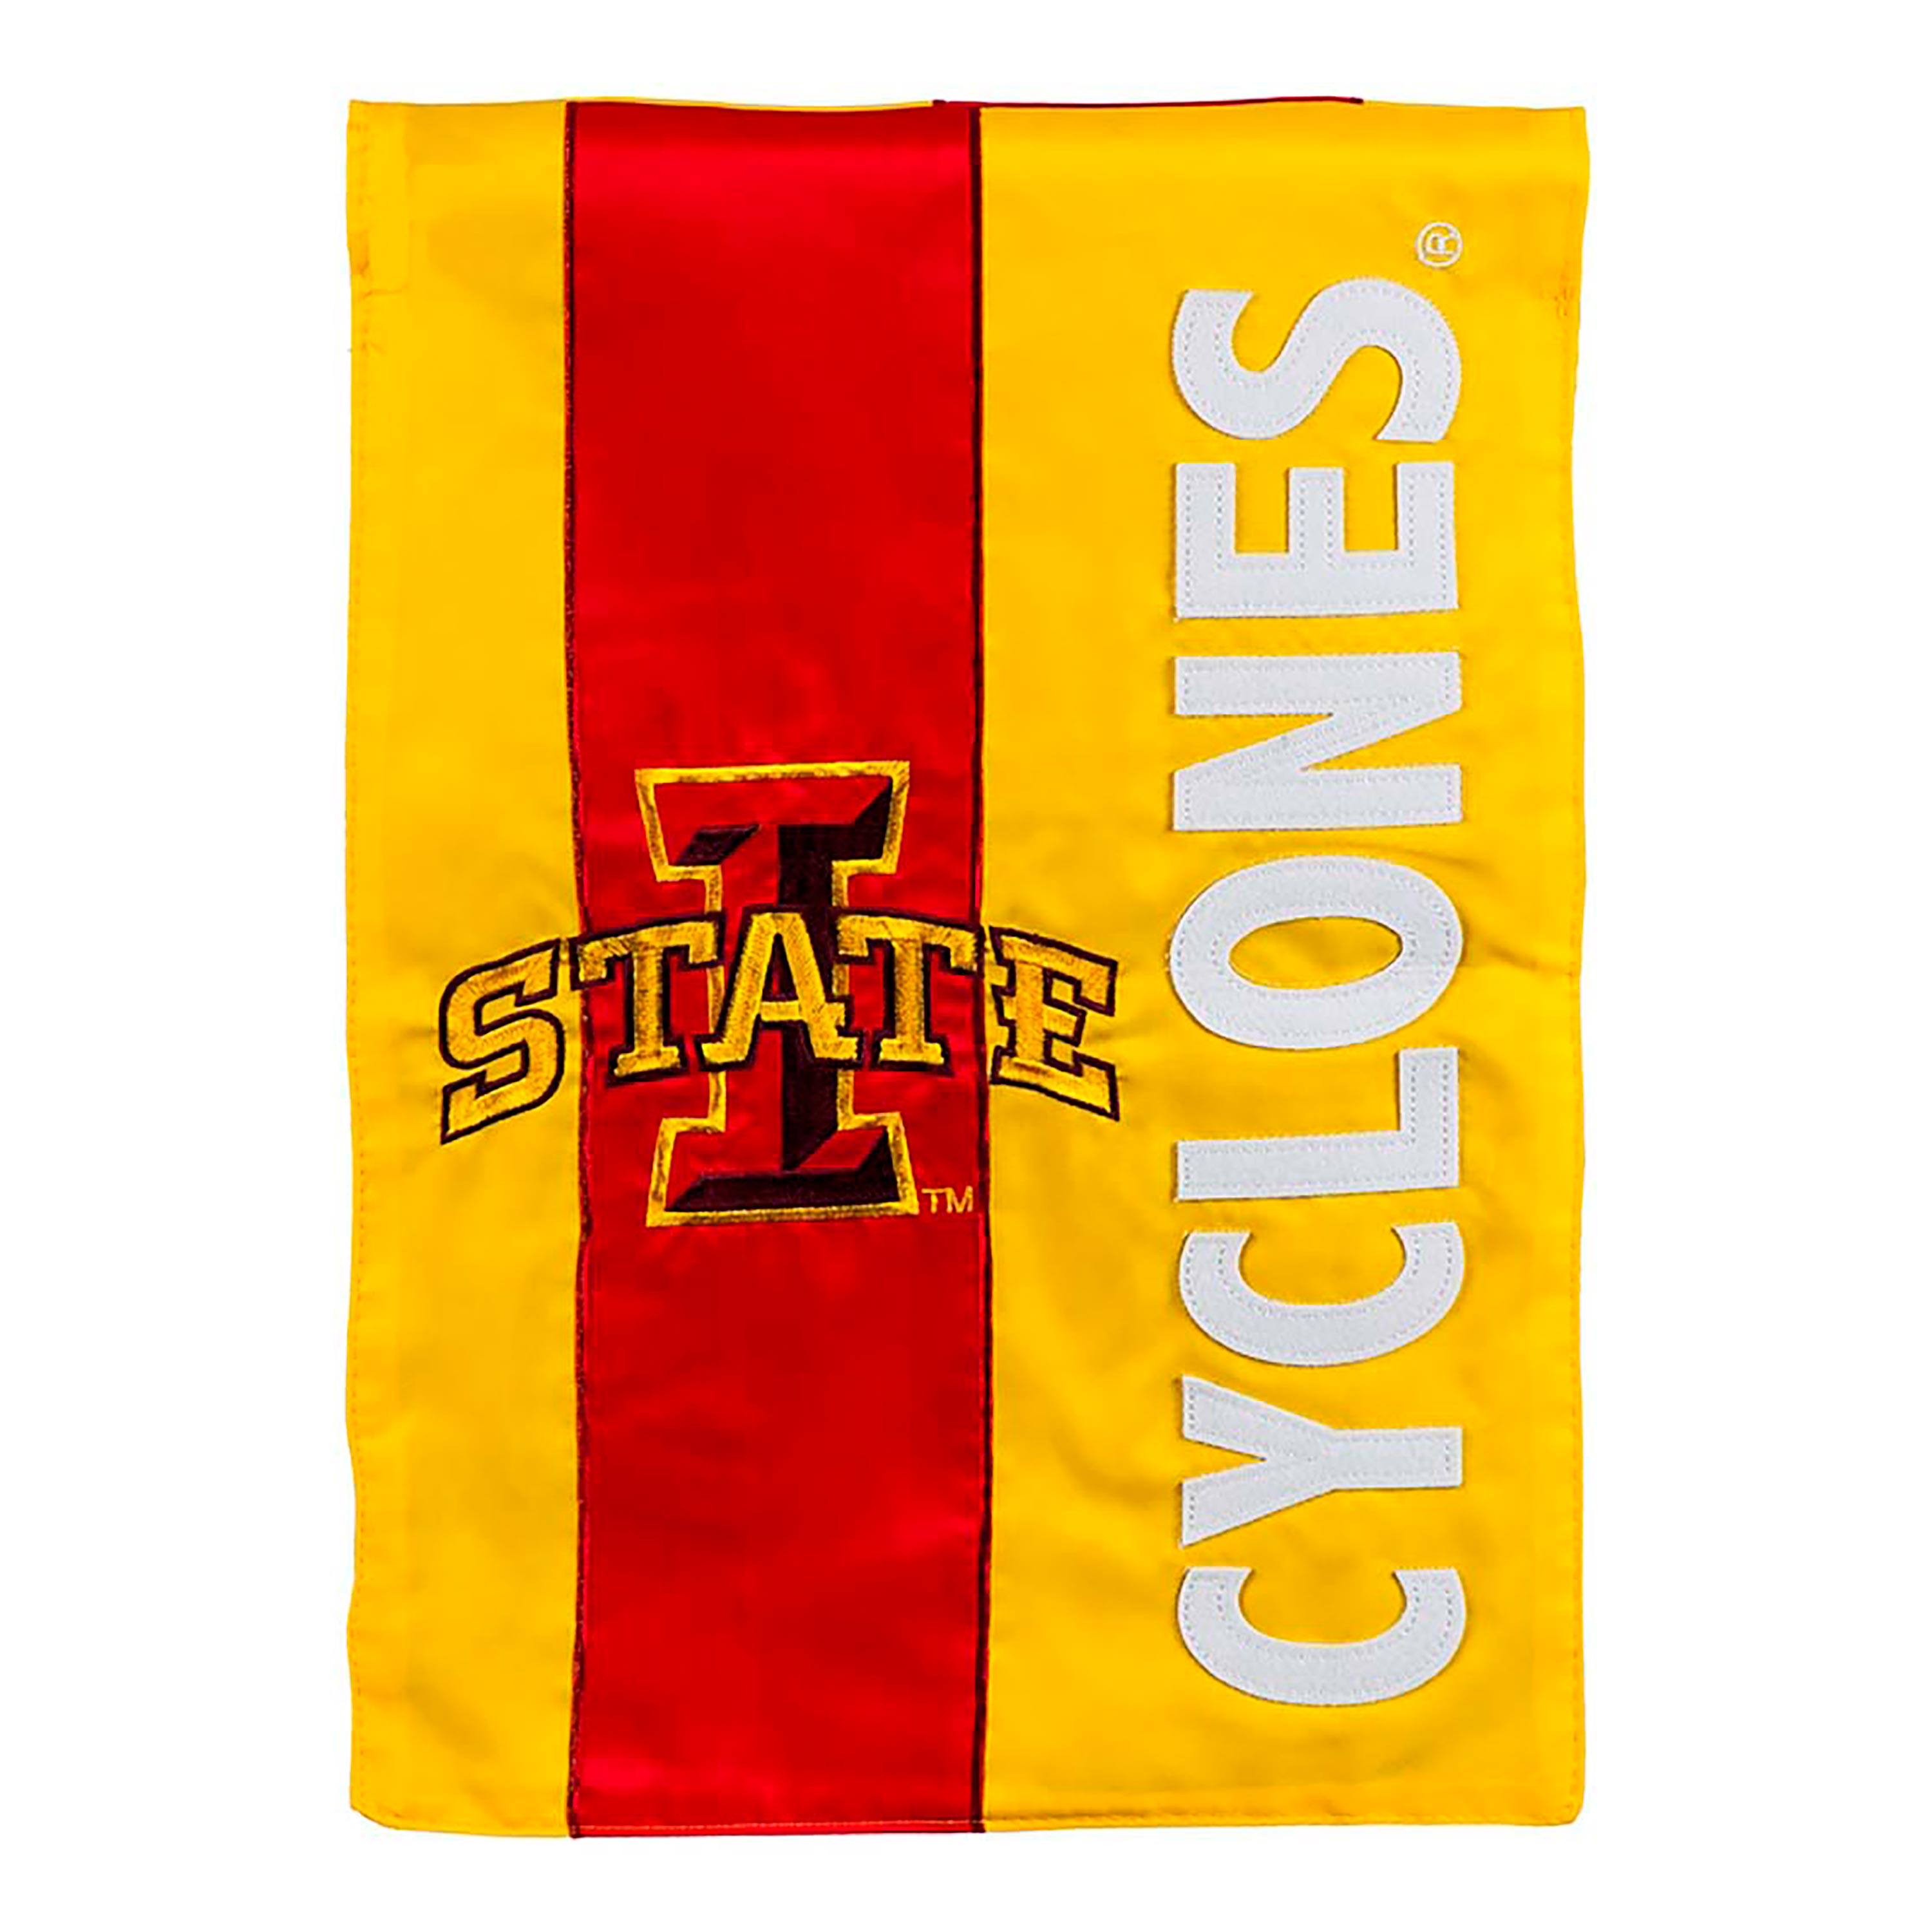 Double-Sided Embellished College Team Pride Applique House Flag